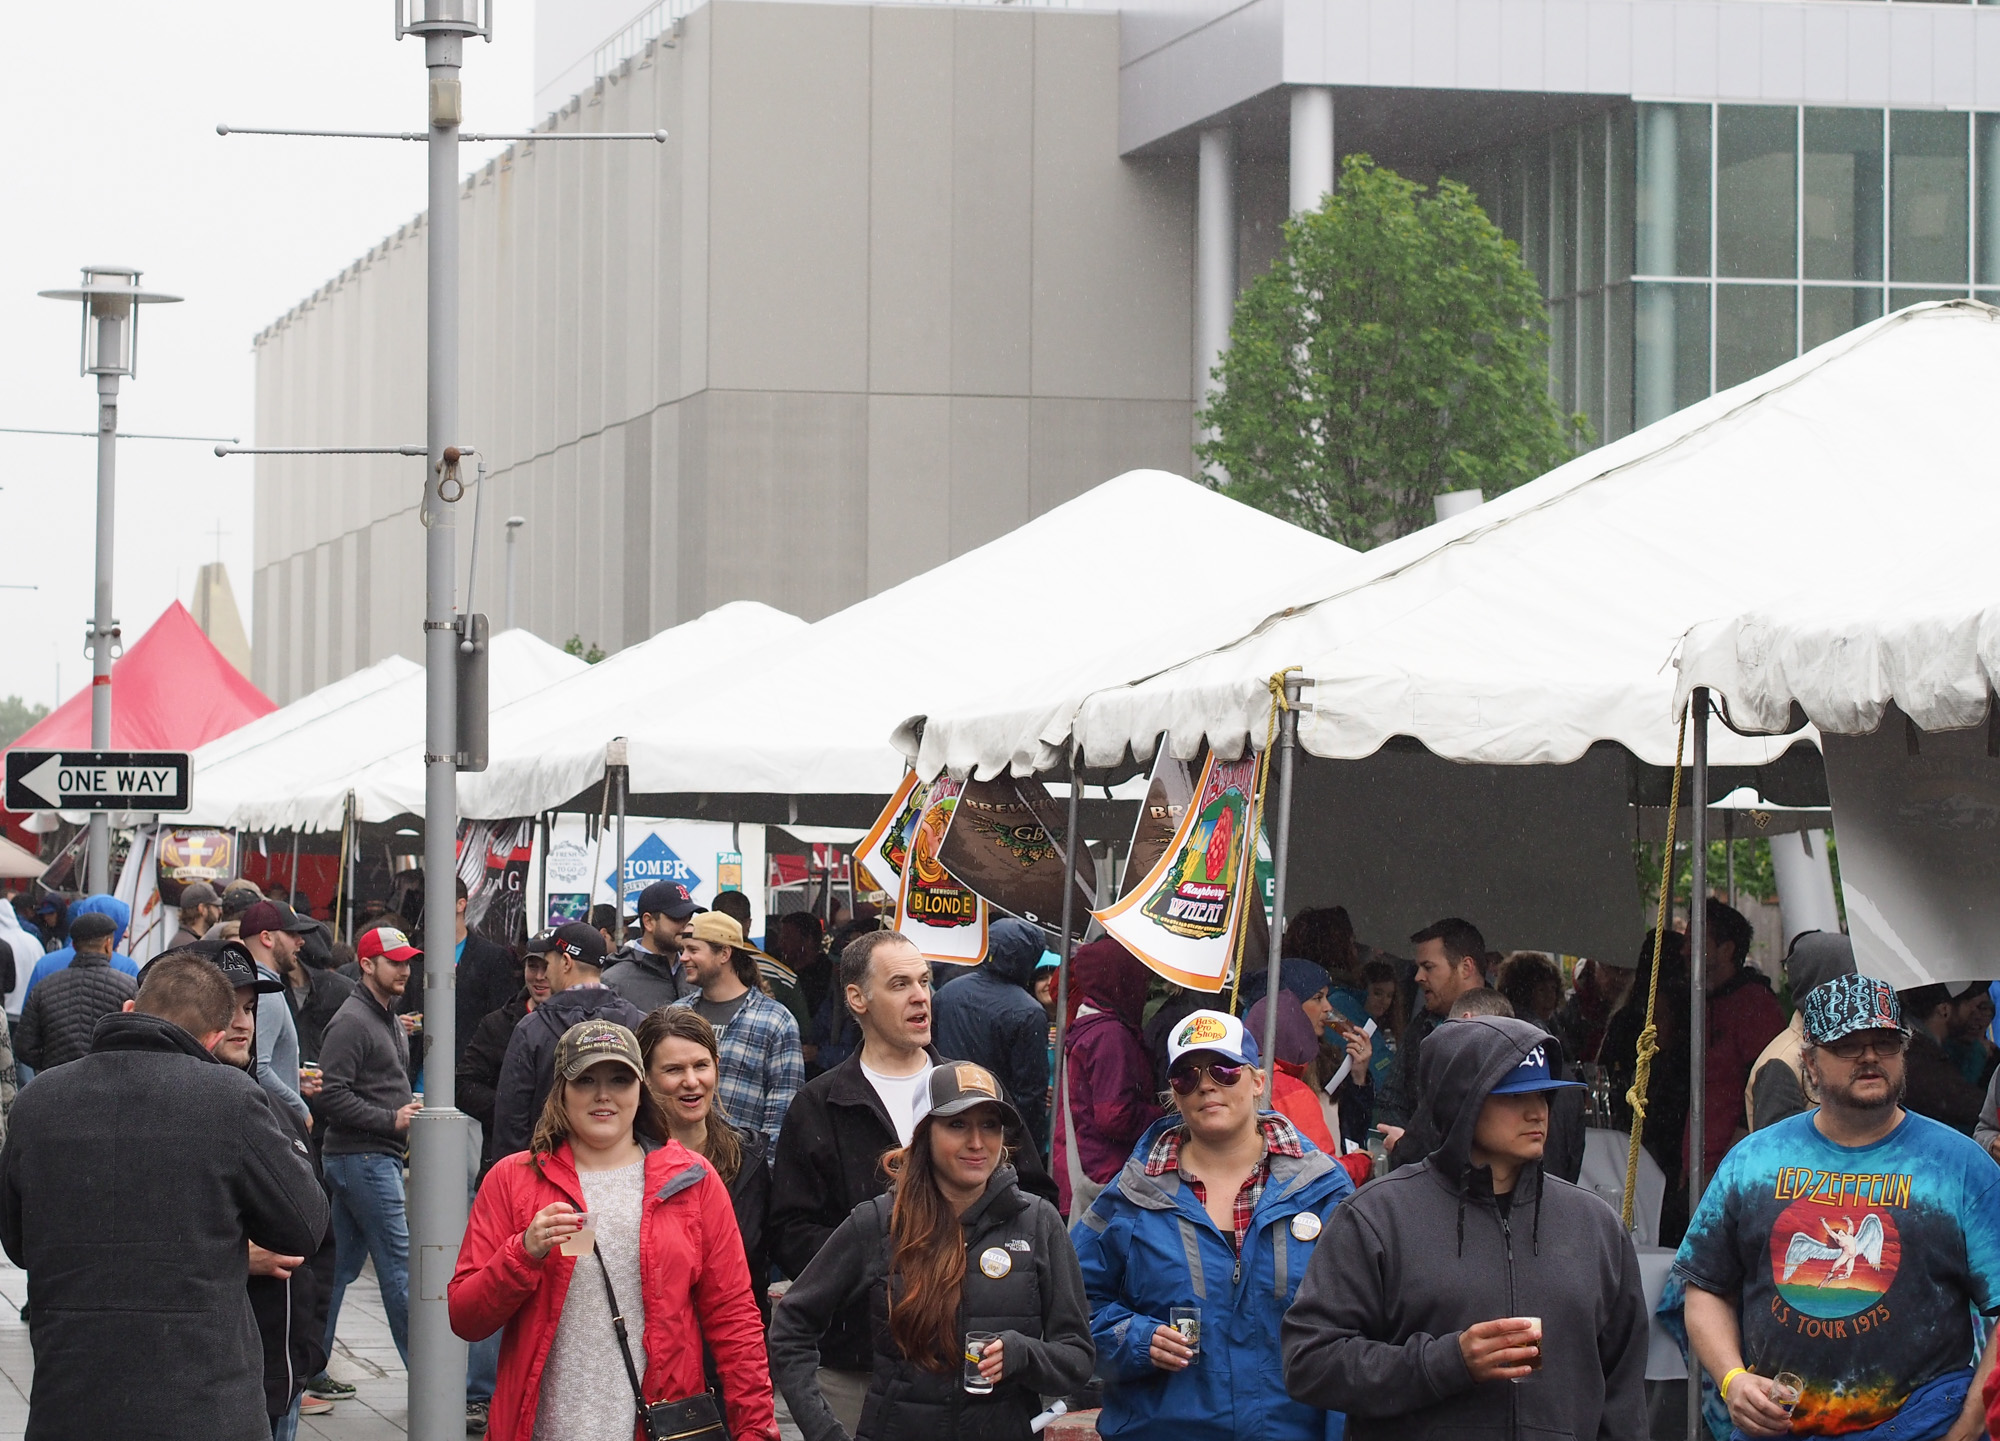 Patrons at the Alaska Crafted Festival visiting beer tents during the Saturday event in downtown Anchorage. (Photo by Zachariah Hughes, Alaska Public Media - Anchorage)